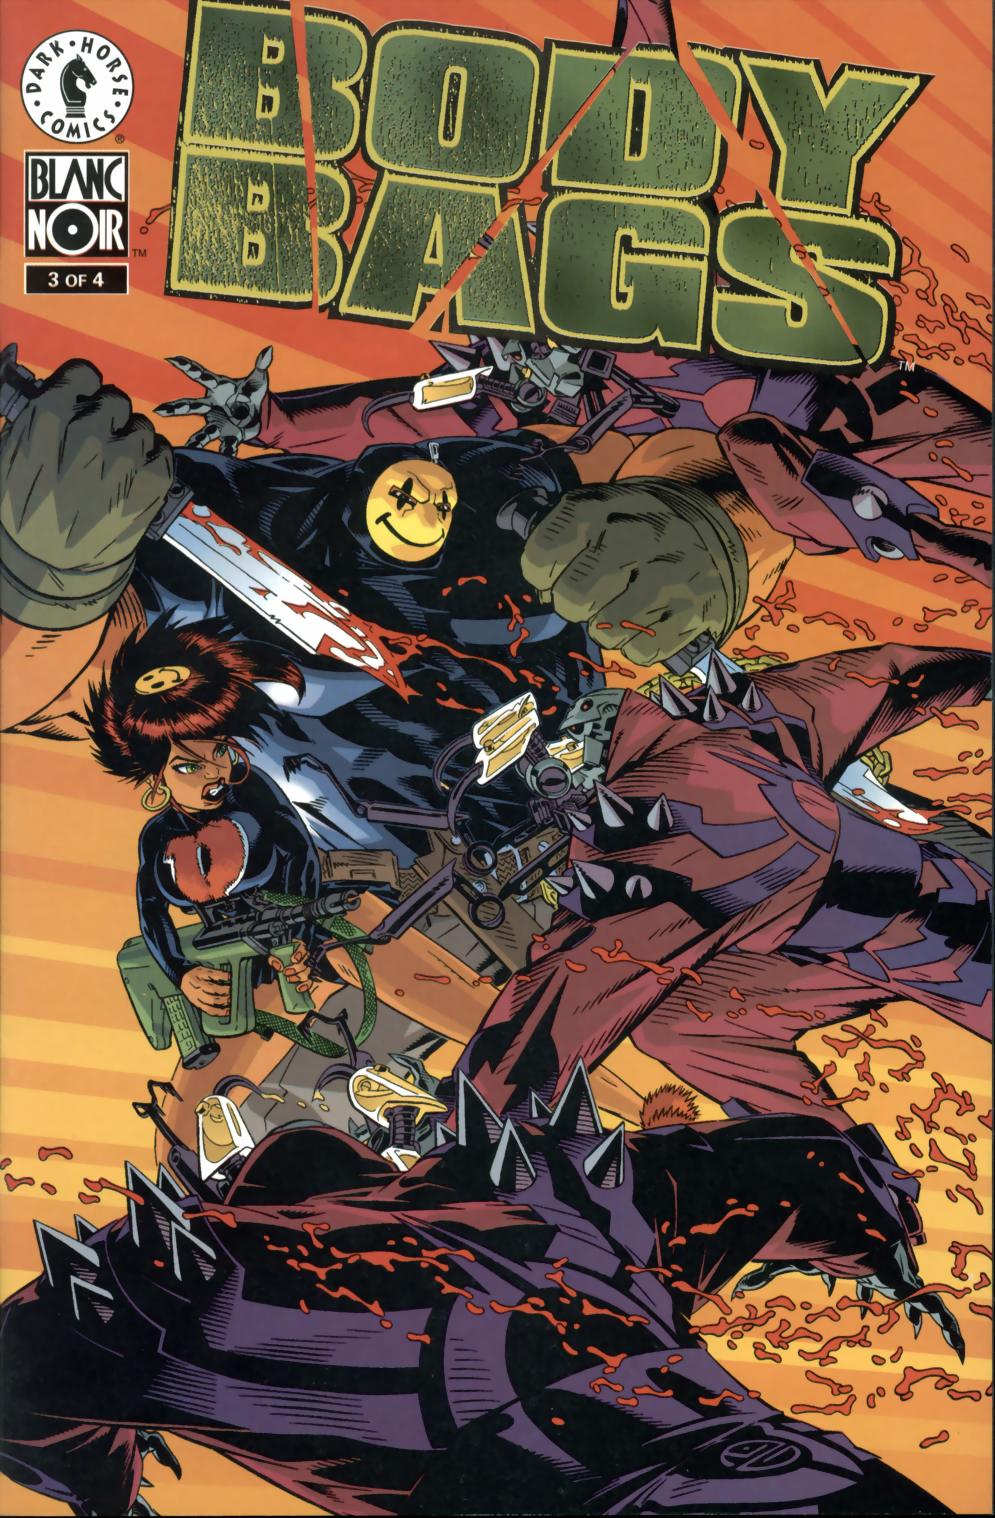 Body Bags (1996) issue 3 - Page 1